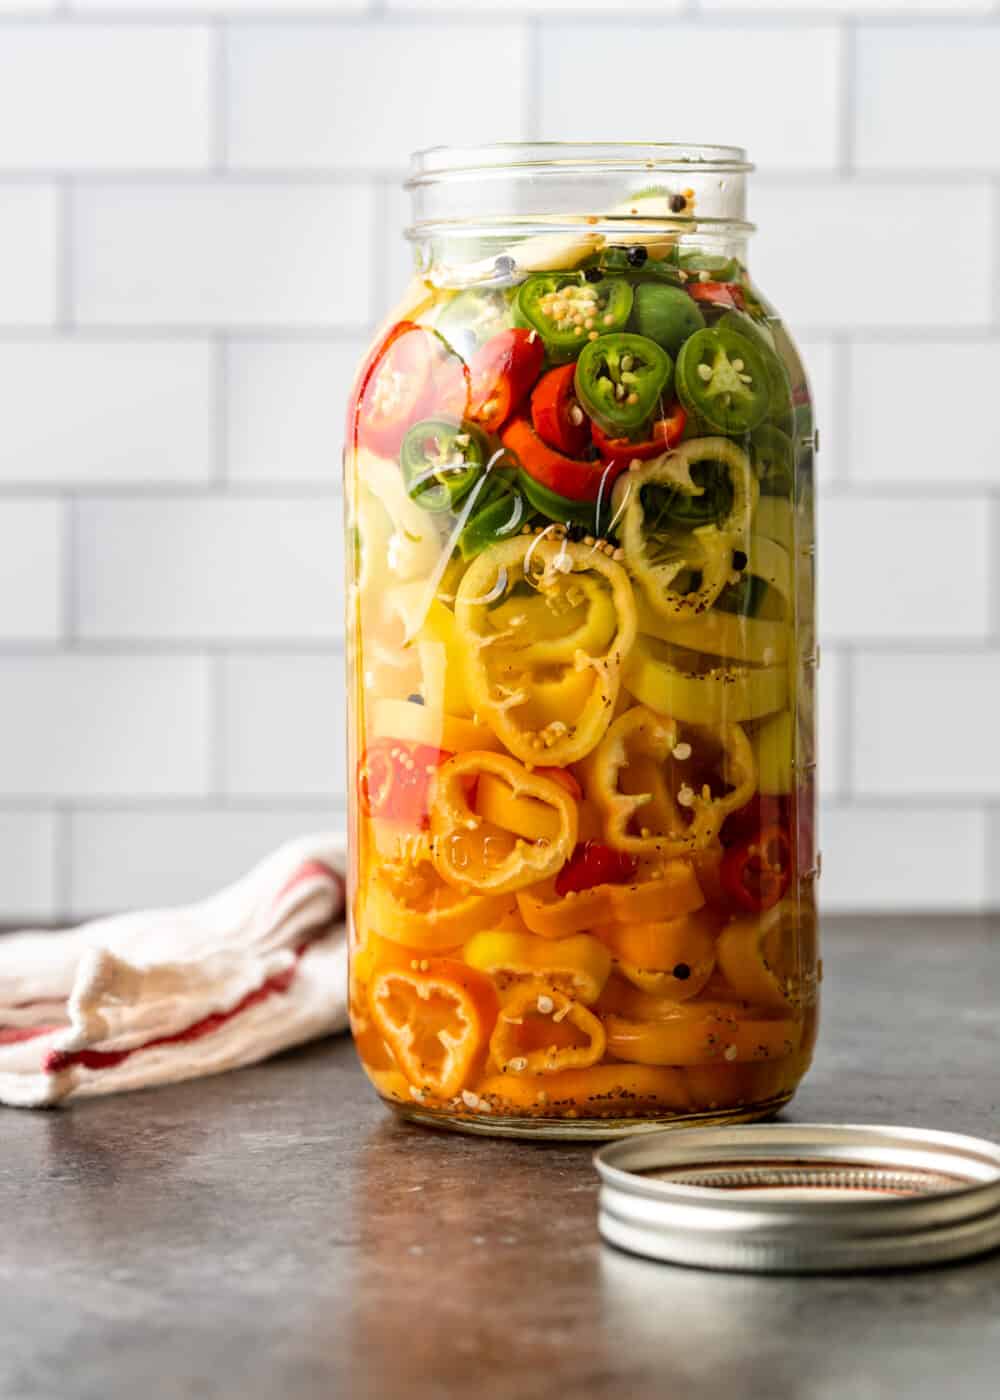 large glass jar of spicy refrigerator pickles